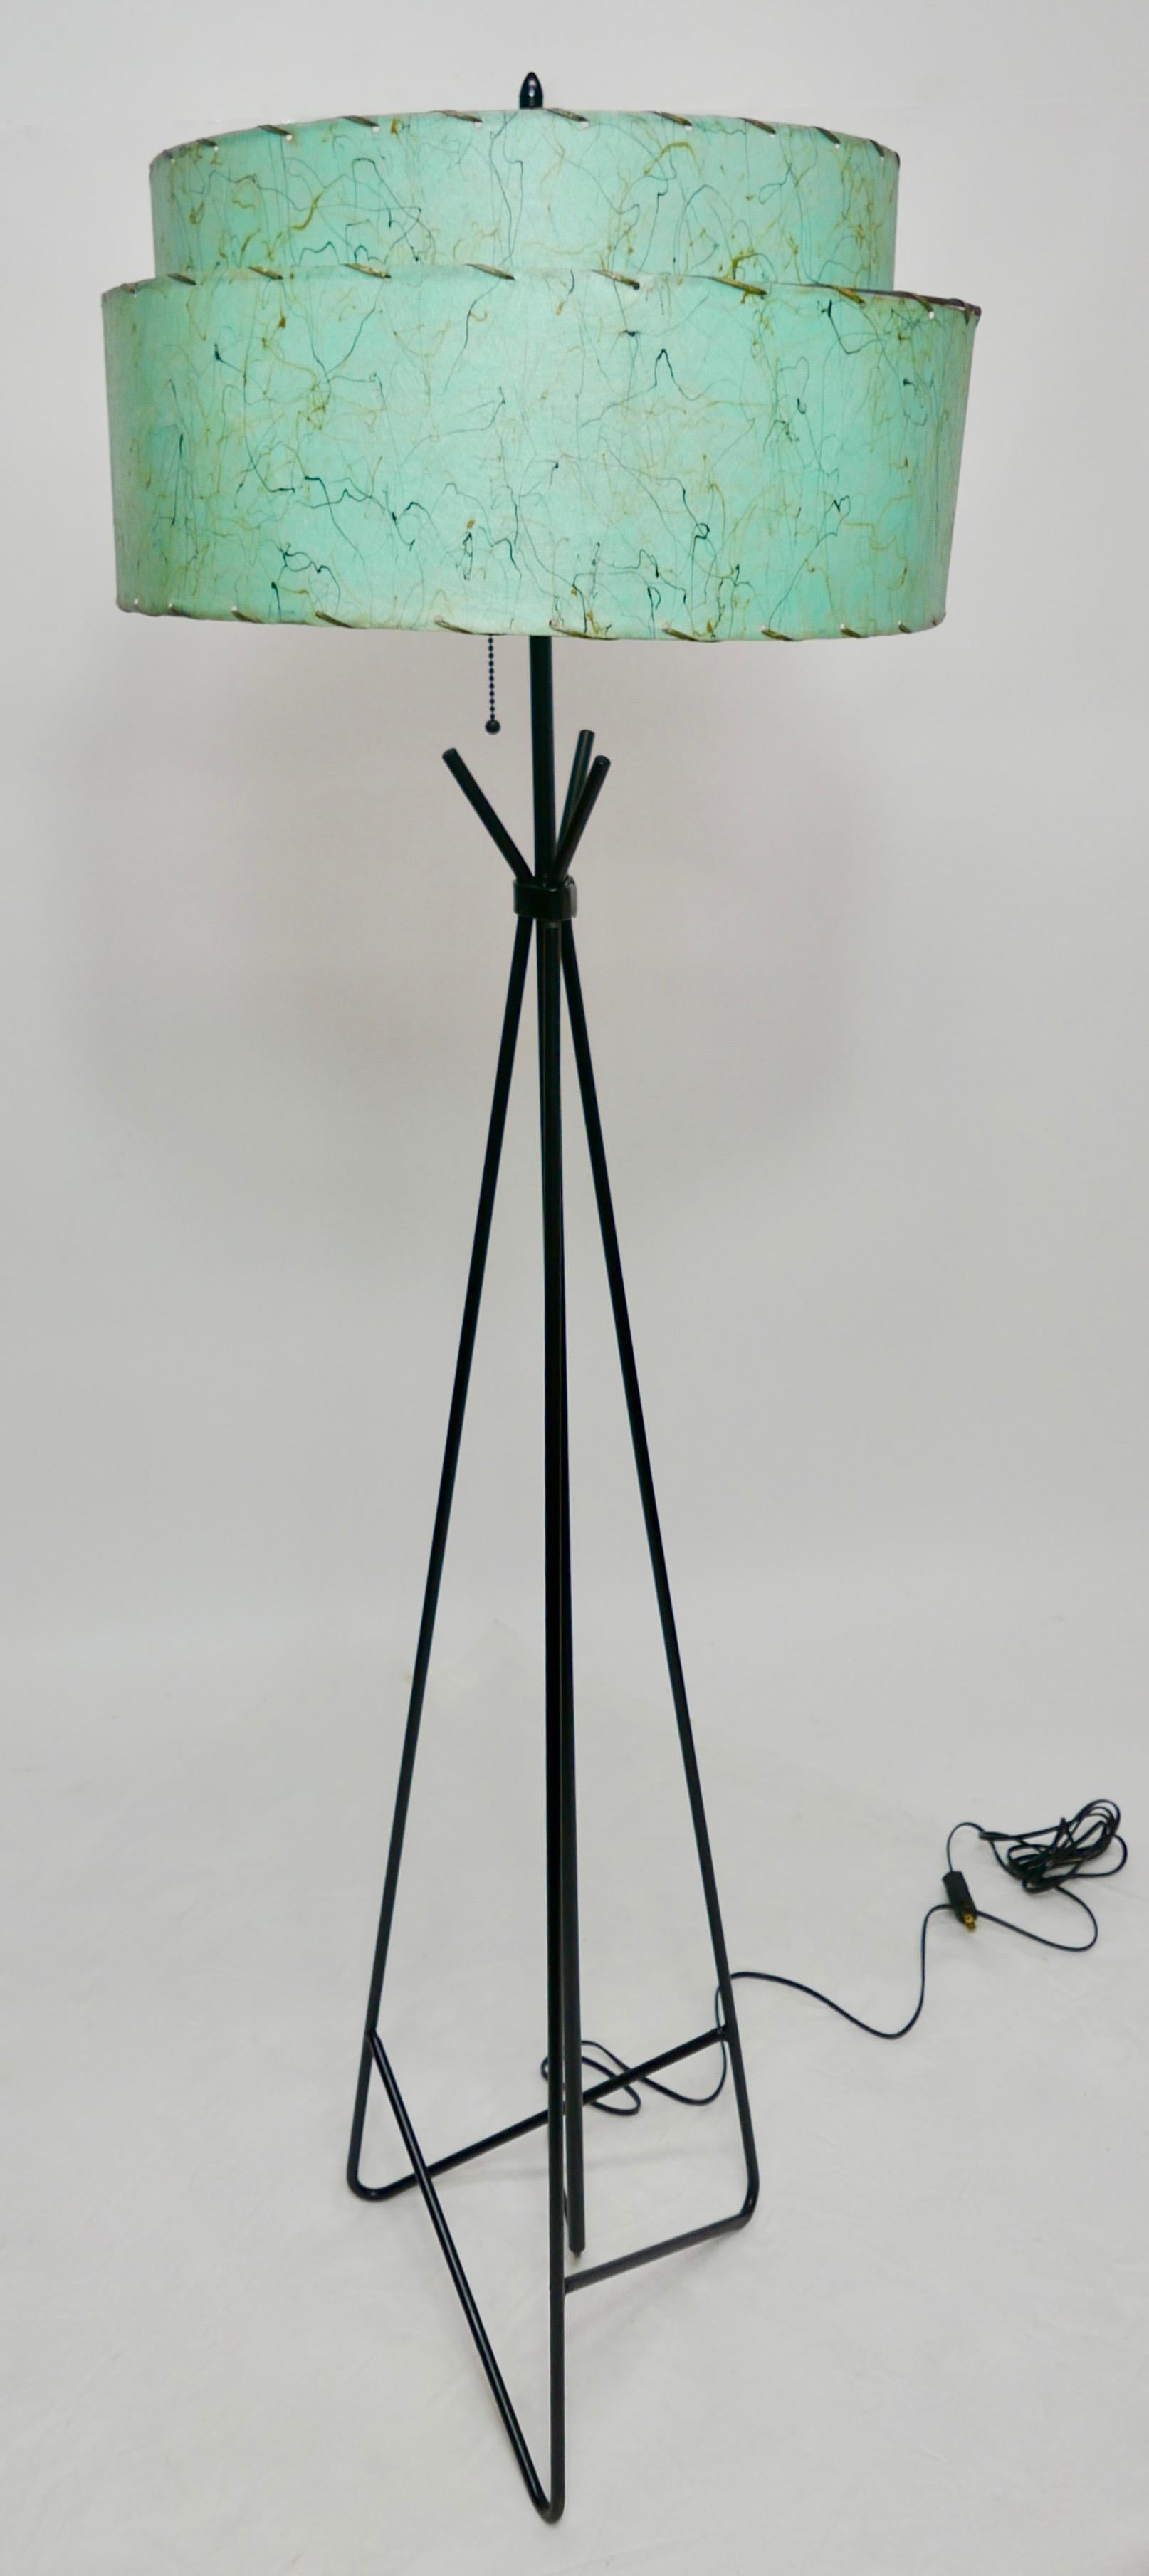 American Mid-Century Modern Period Floor Lamp with Original Whip-Stitched Shade 7